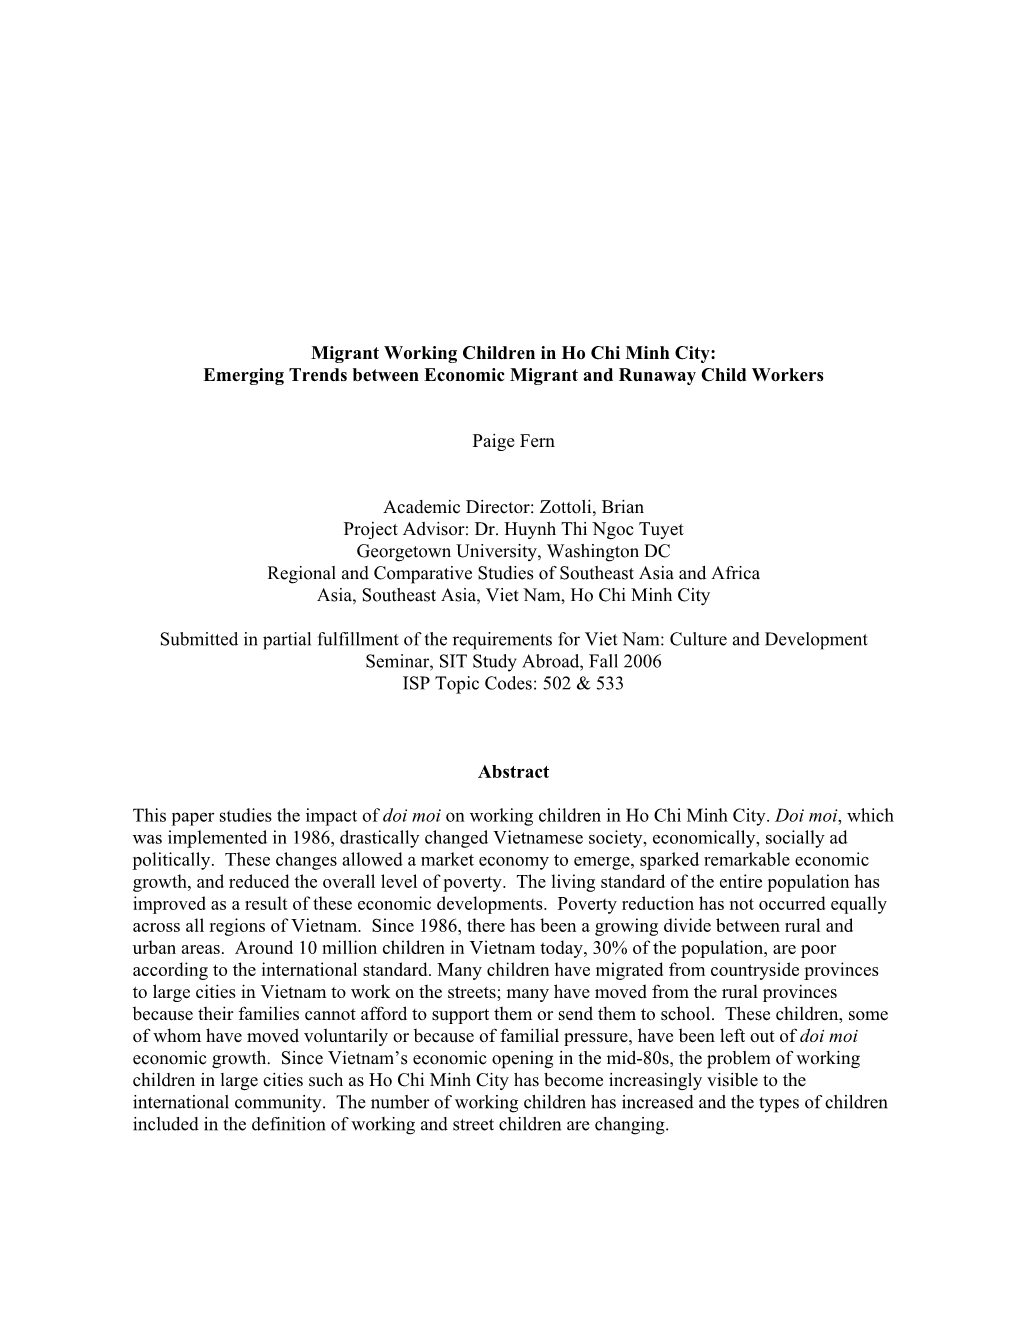 Migrant Working Children in Ho Chi Minh City: Emerging Trends Between Economic Migrant and Runaway Child Workers